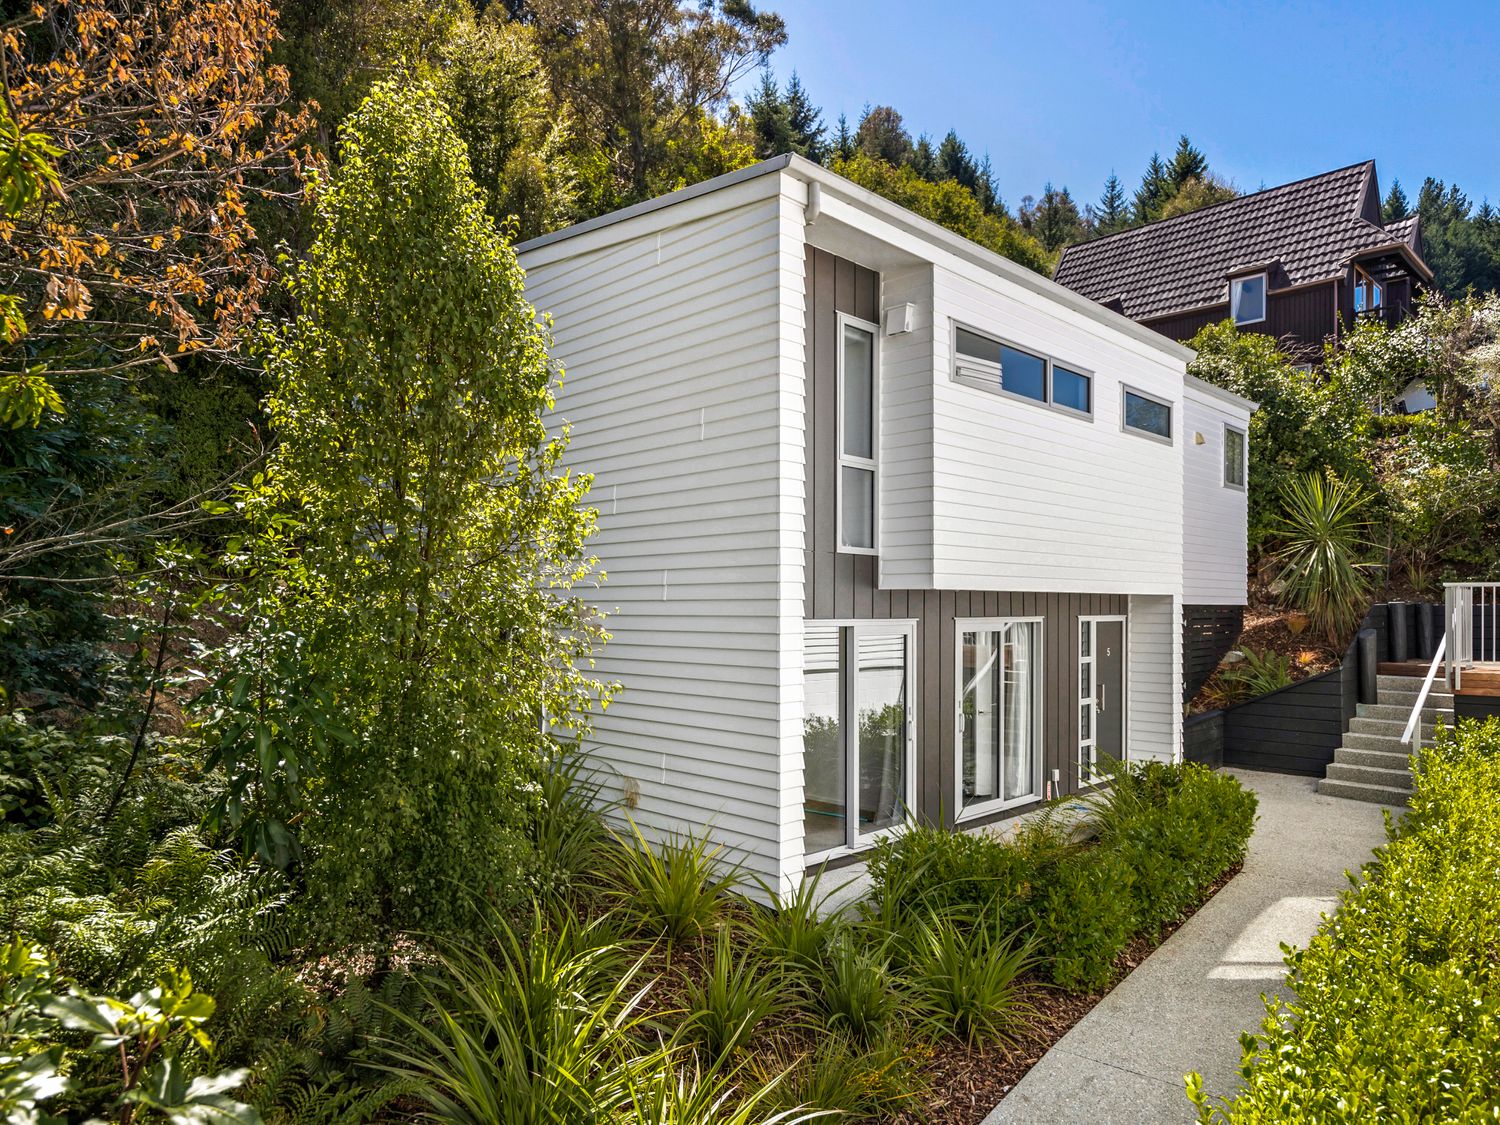 Leisurely on Lomond - Queenstown Holiday Home -  - 1131548 - photo 1